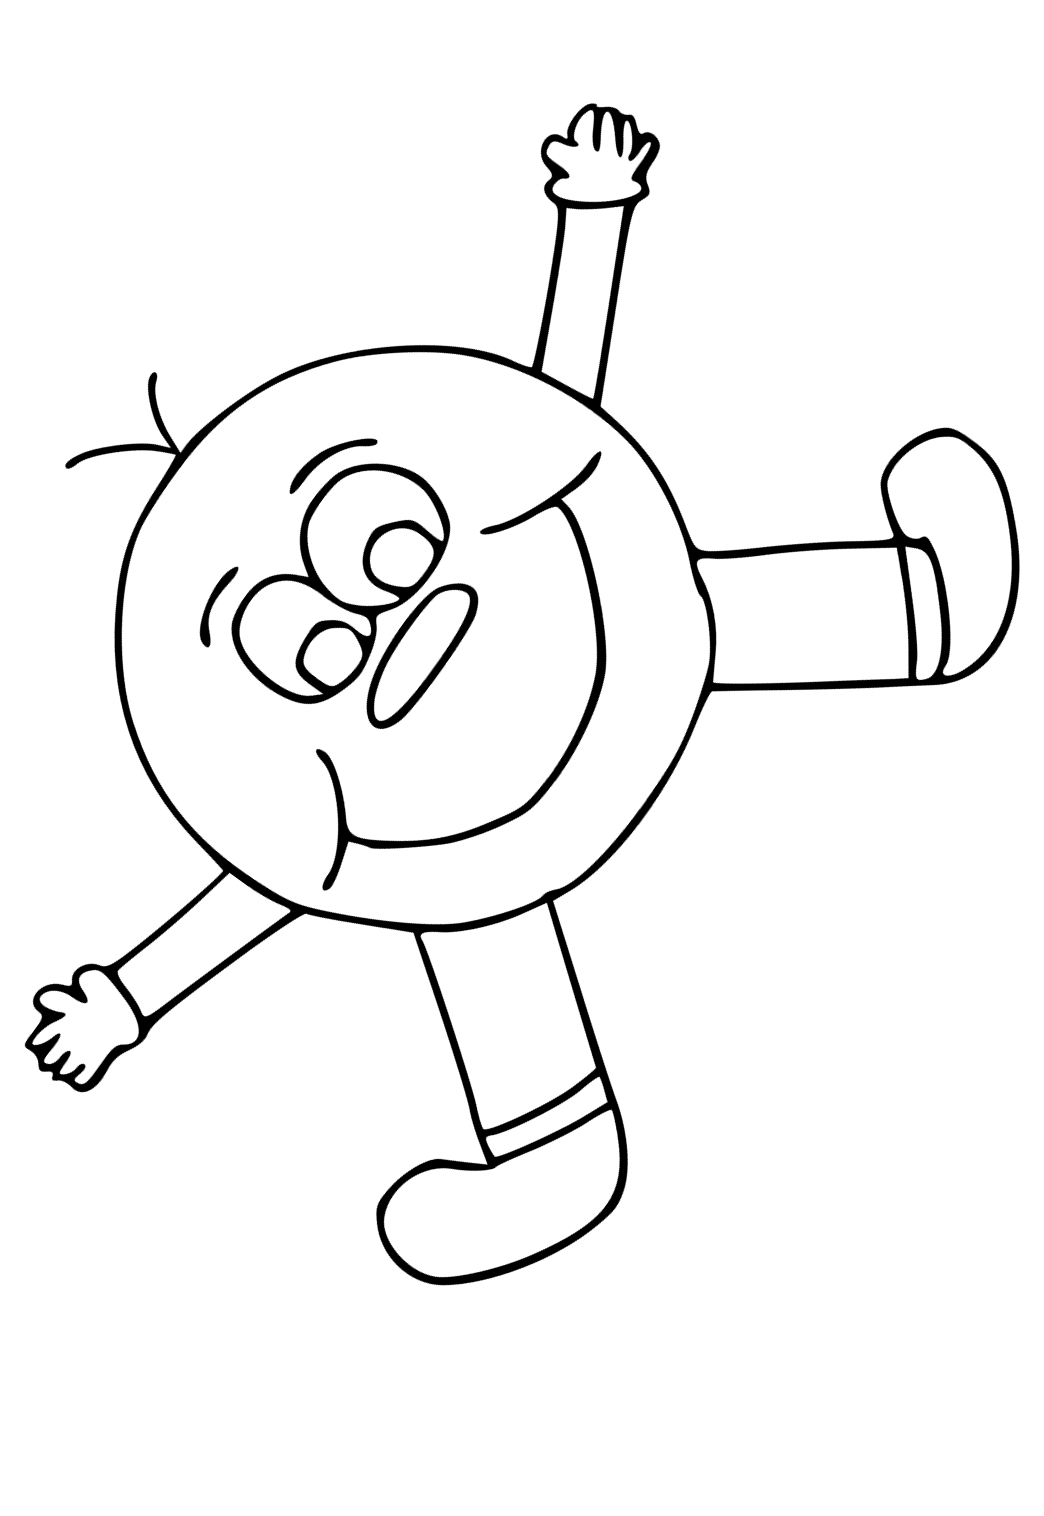 Free printable smiley face funny coloring page for adults and kids